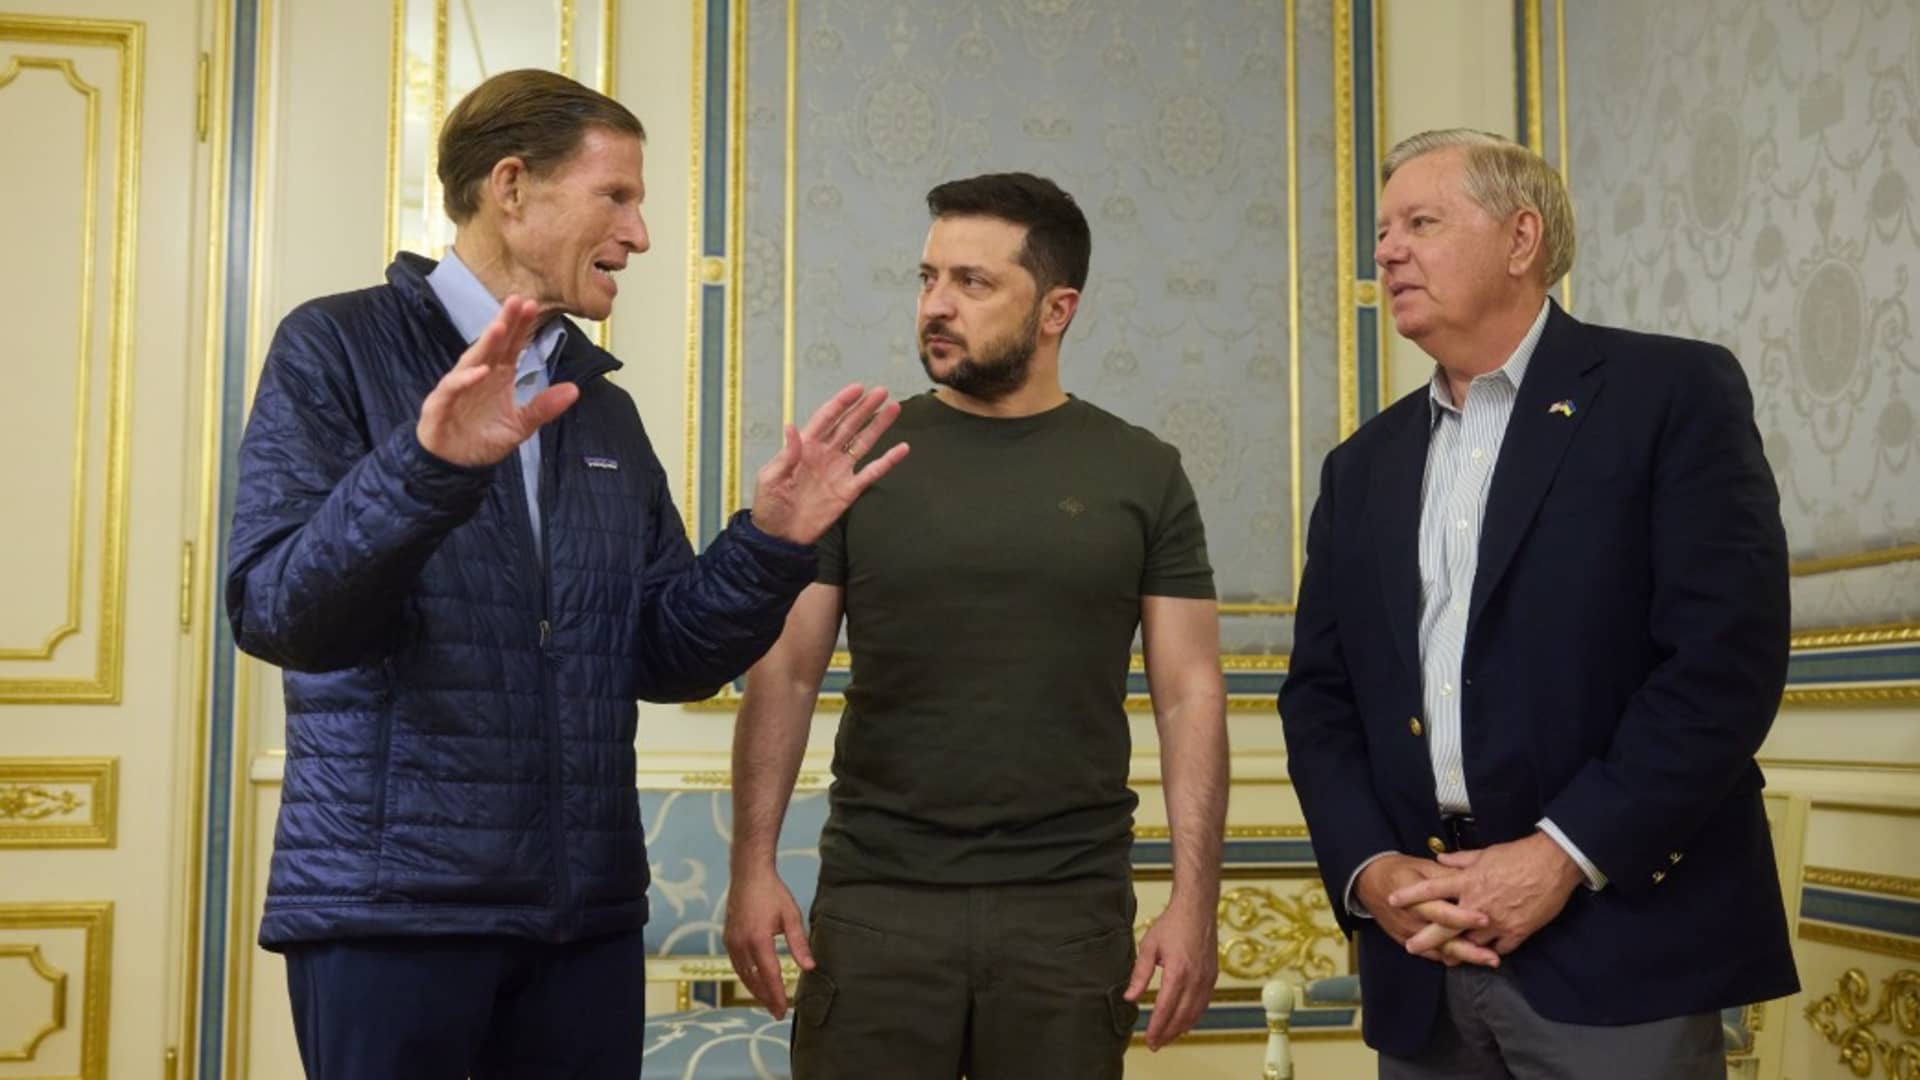 President of Ukraine Volodymyr Zelenskyy held a meeting with United States Senators Lindsey Graham and Richard Blumenthal who represent the Republican and Democratic parties of the United States.